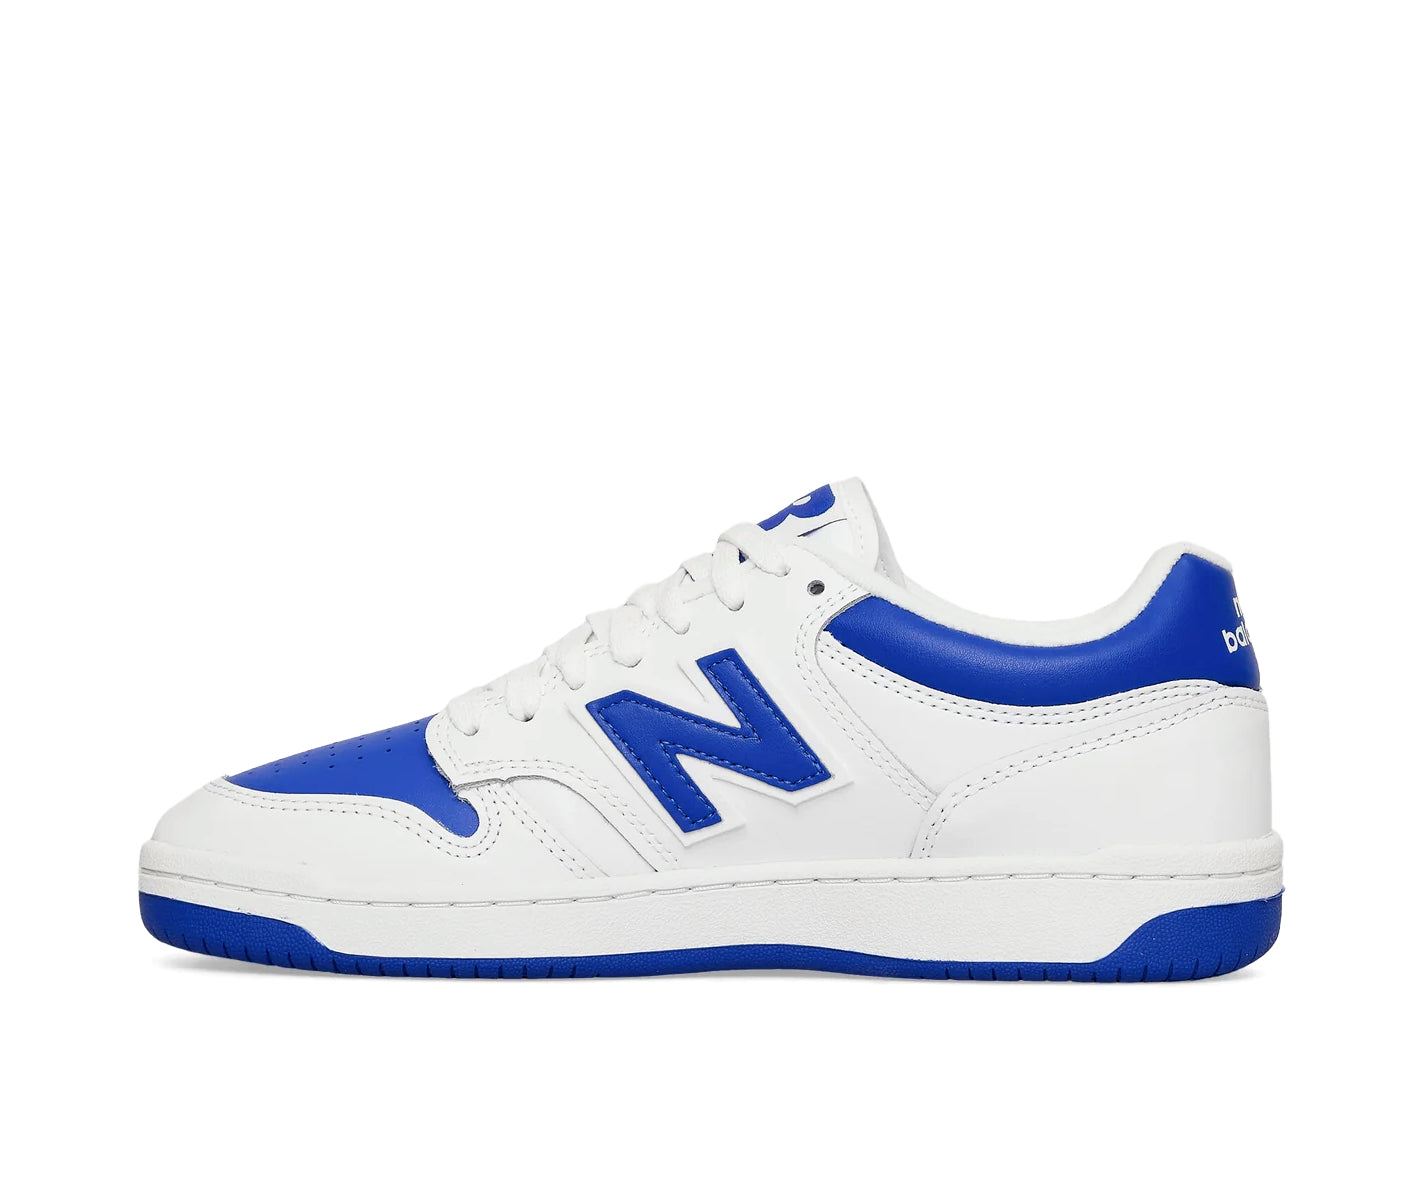 A white leather New Balance basketball shoe with cobalt blue accents.